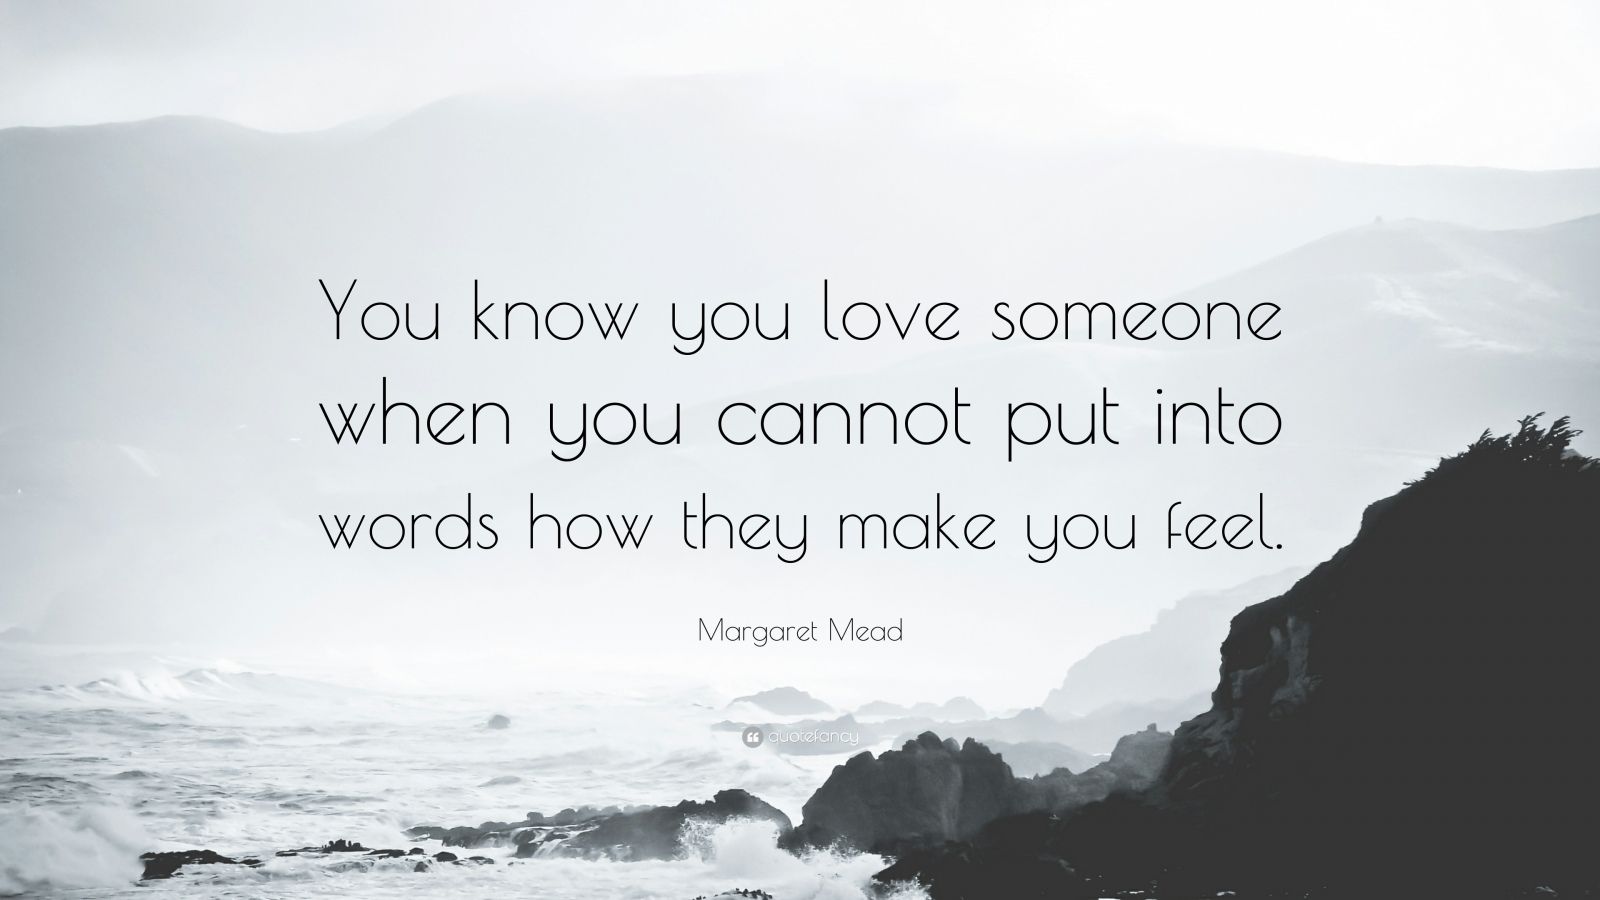 Margaret Mead Quote: “You know you love someone when you cannot put ...